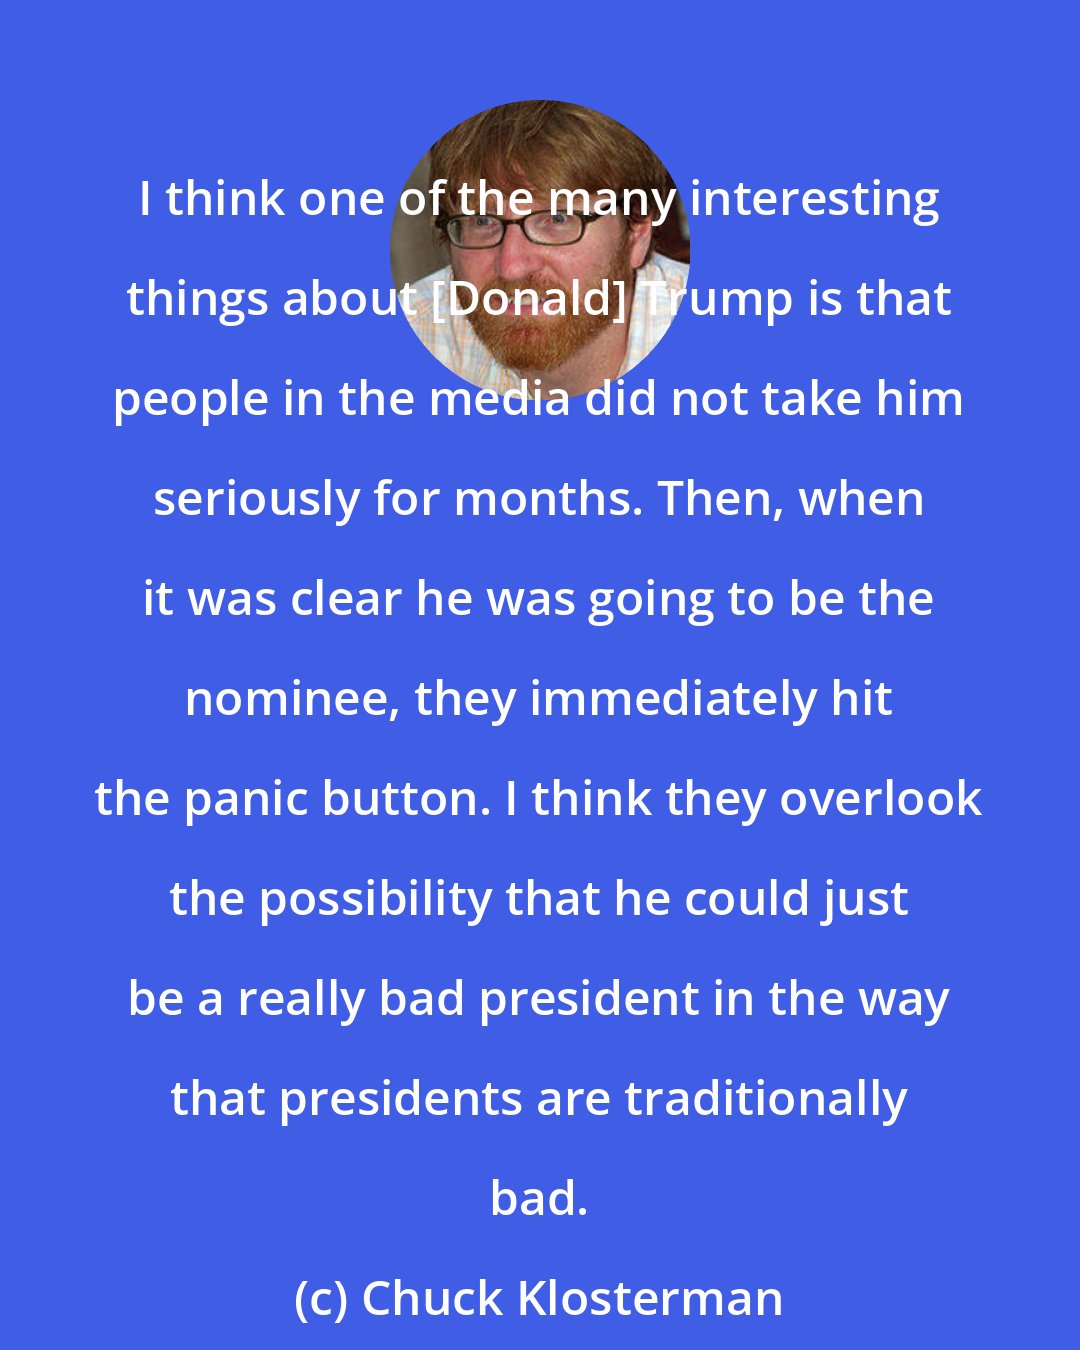 Chuck Klosterman: I think one of the many interesting things about [Donald] Trump is that people in the media did not take him seriously for months. Then, when it was clear he was going to be the nominee, they immediately hit the panic button. I think they overlook the possibility that he could just be a really bad president in the way that presidents are traditionally bad.